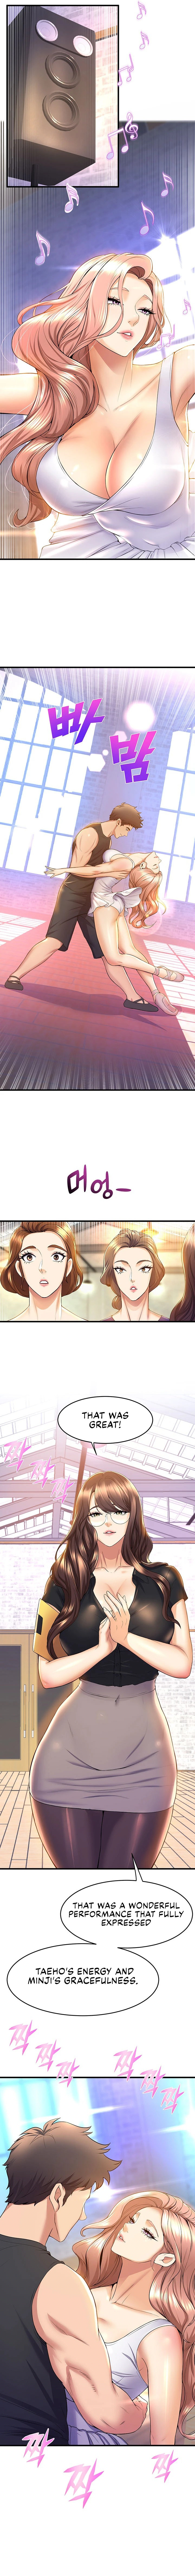 Dance Department’s Female Sunbaes - Chapter 39 Page 8